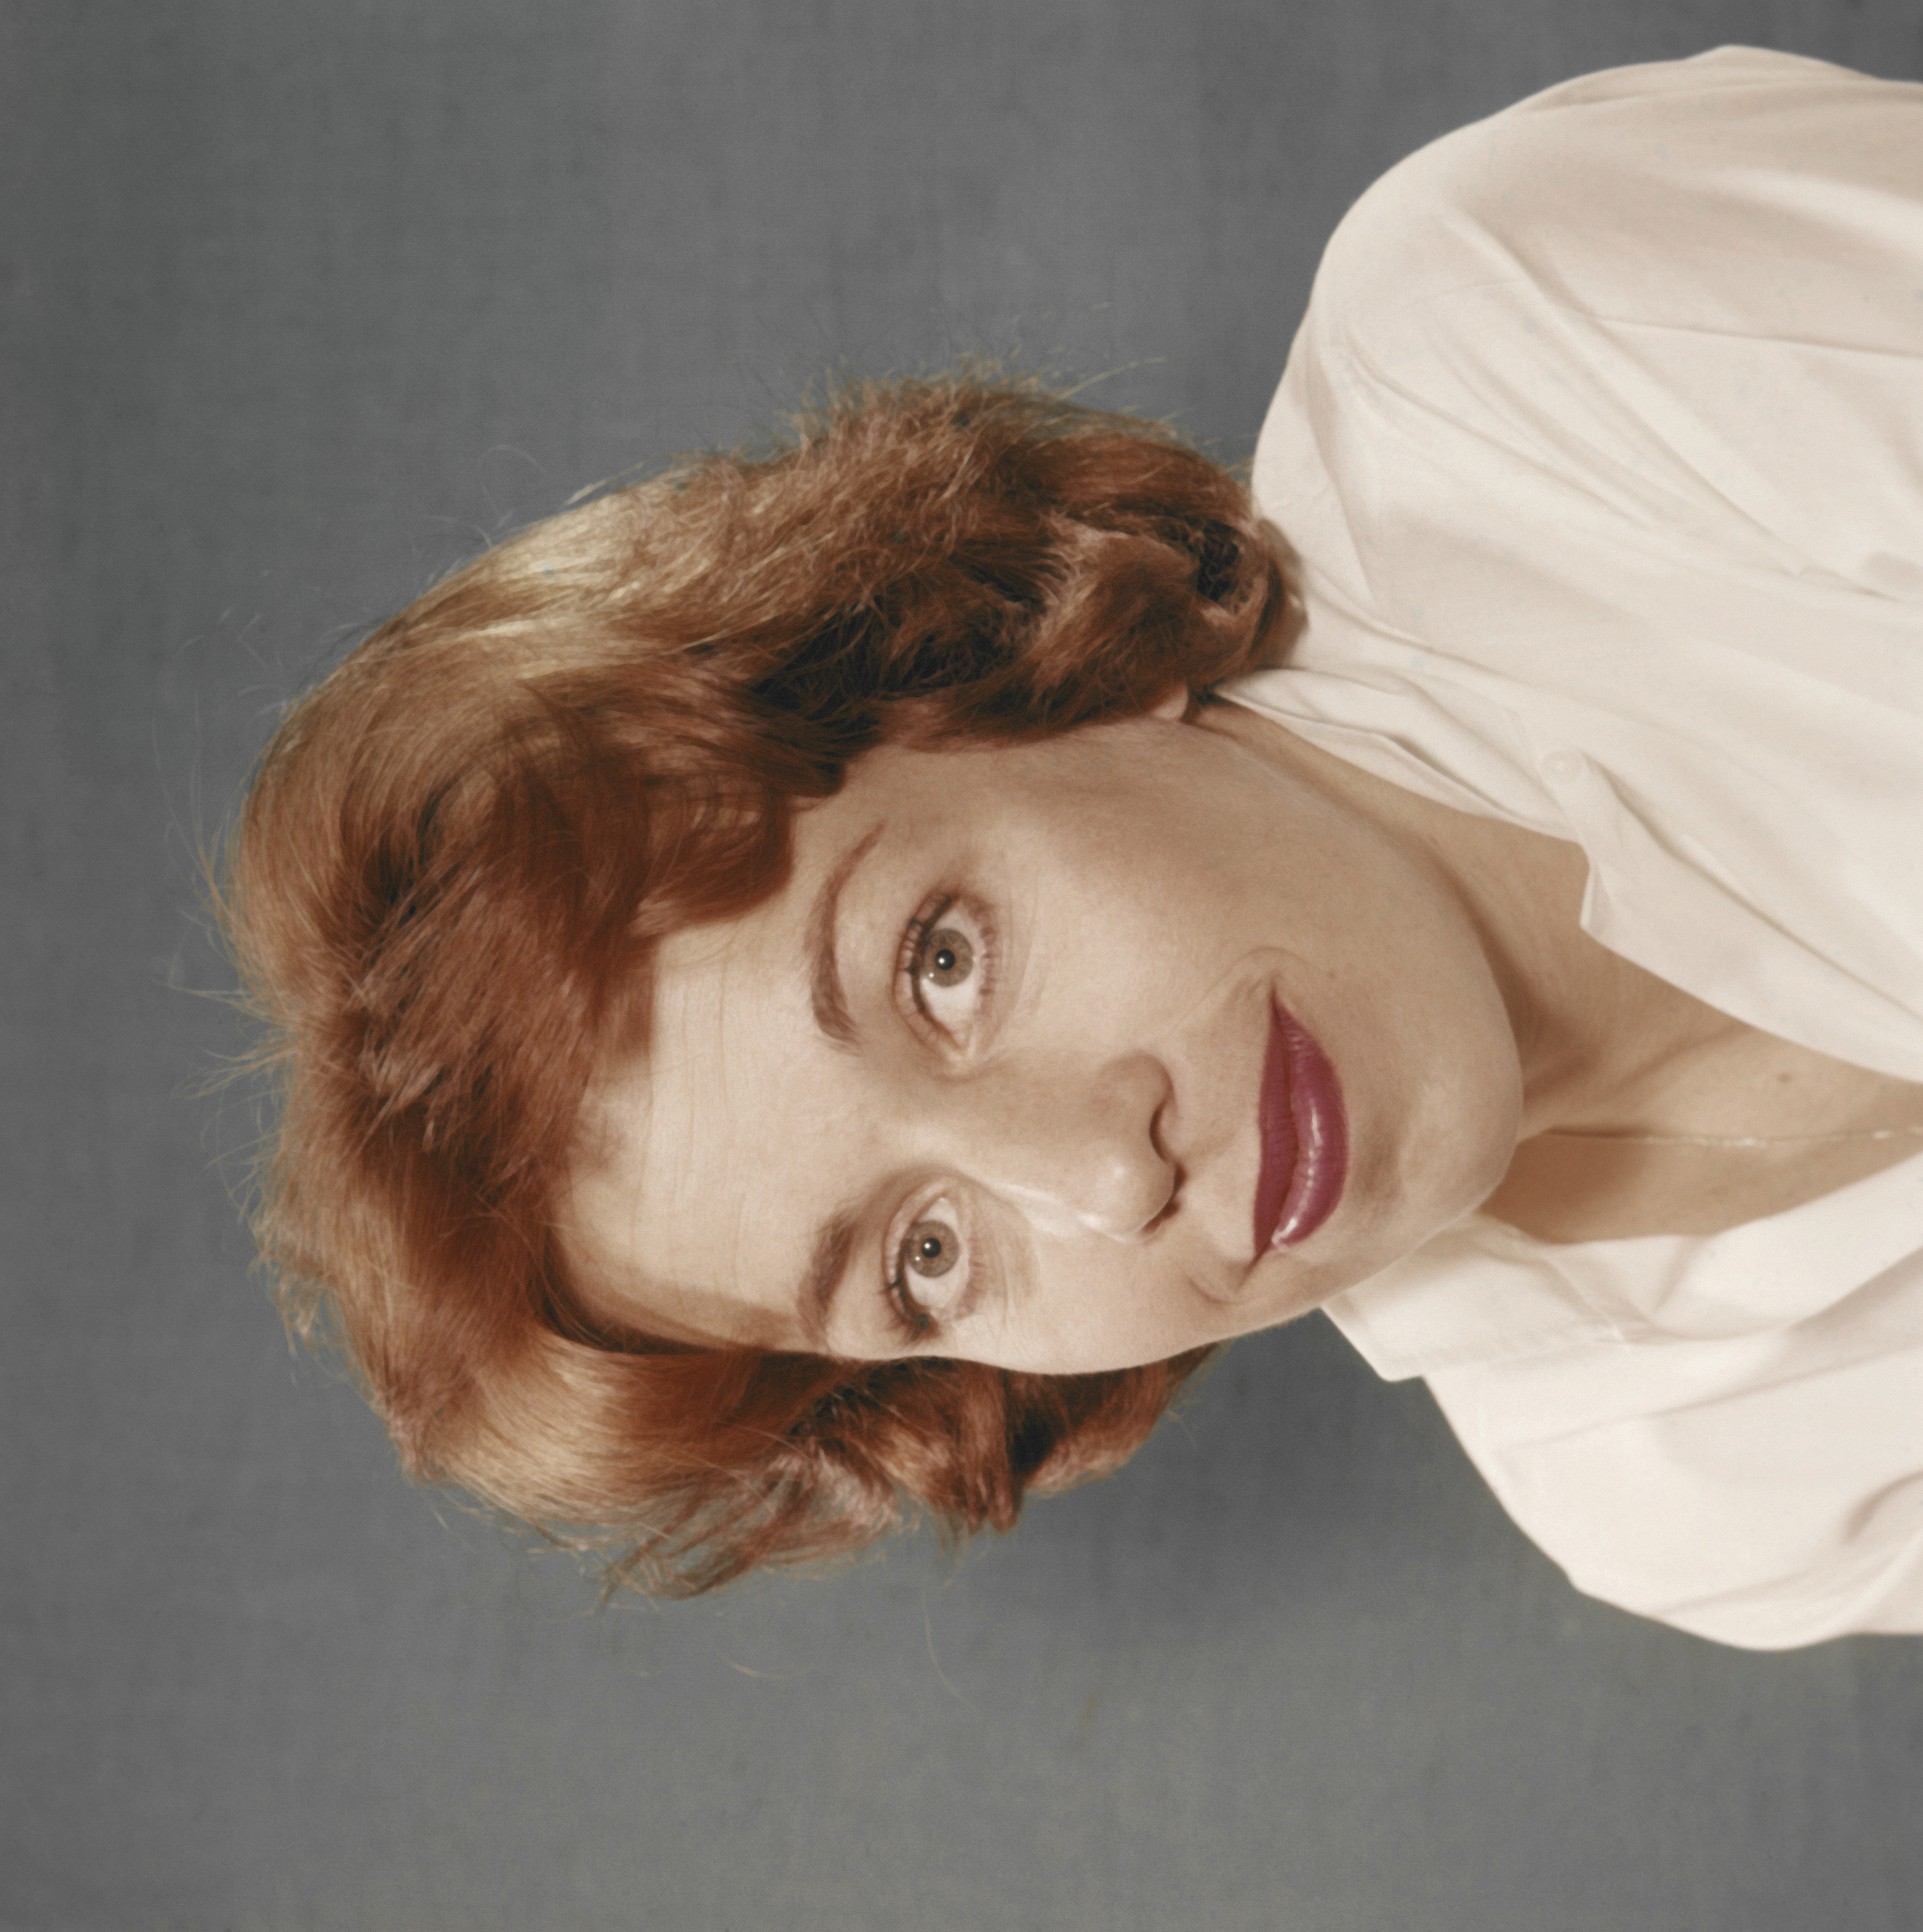 Carol Burnett poses for a portrait on January 1, 1958 | Source: Getty Images